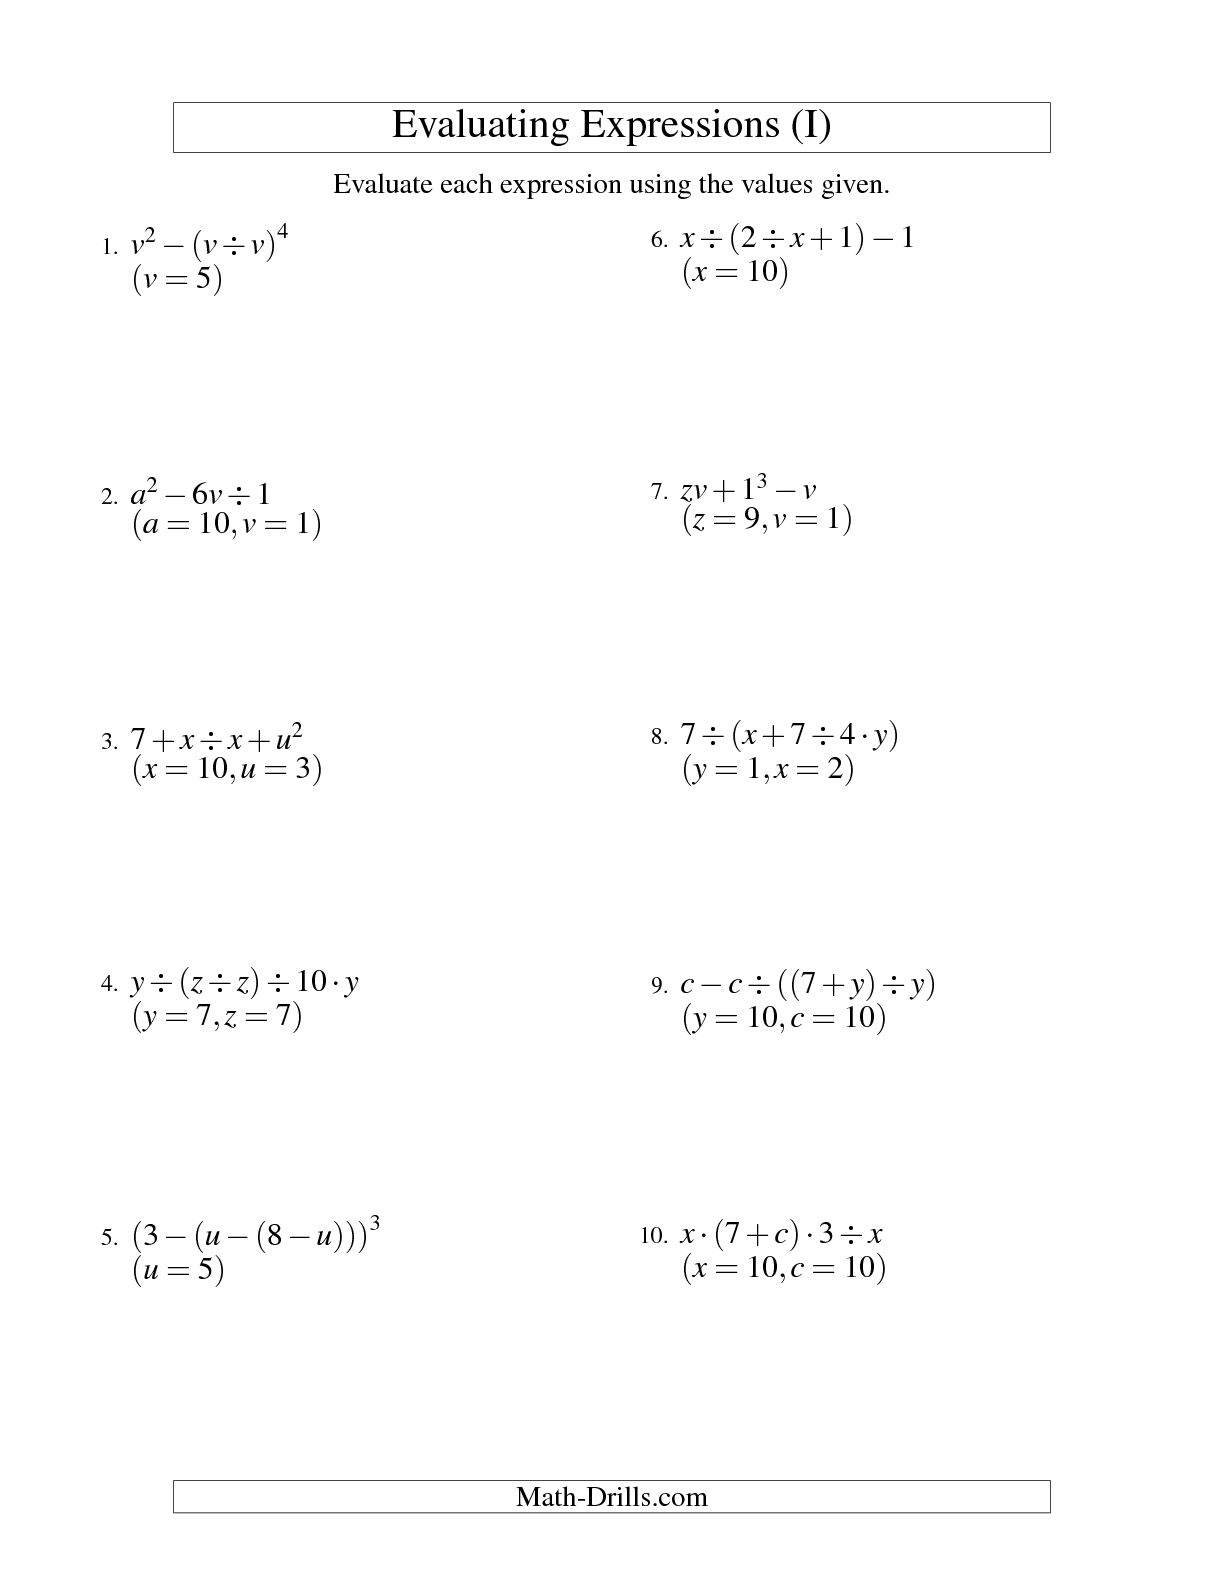 Evaluating Expressions Worksheet Answer Key